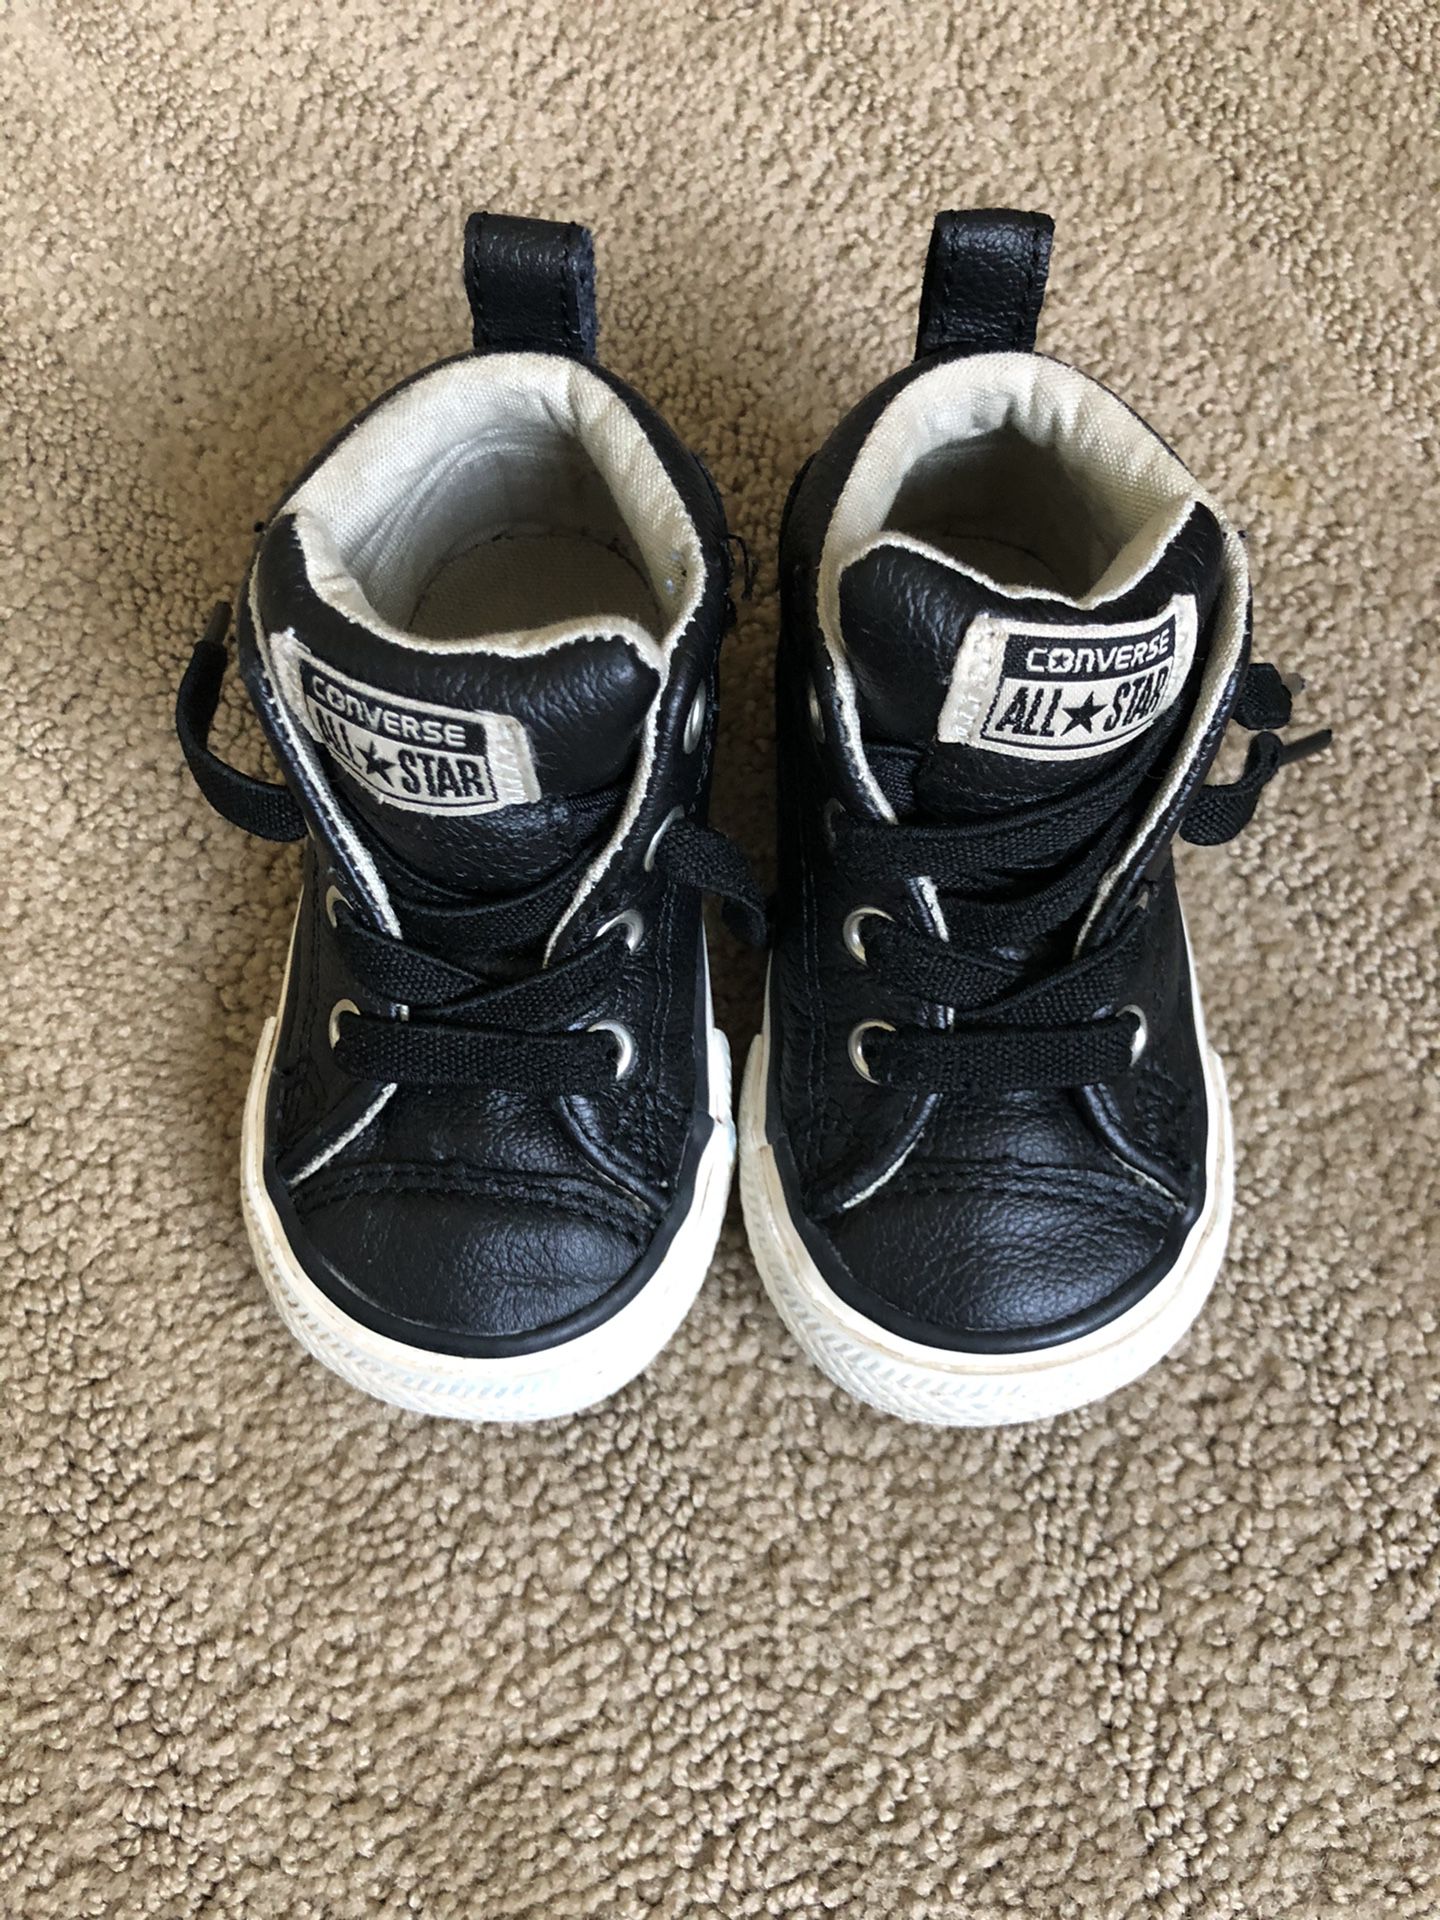 Converse CTAS Leather High Top Tie Sneakers Size 4 for Sale in Duvall, WA - OfferUp